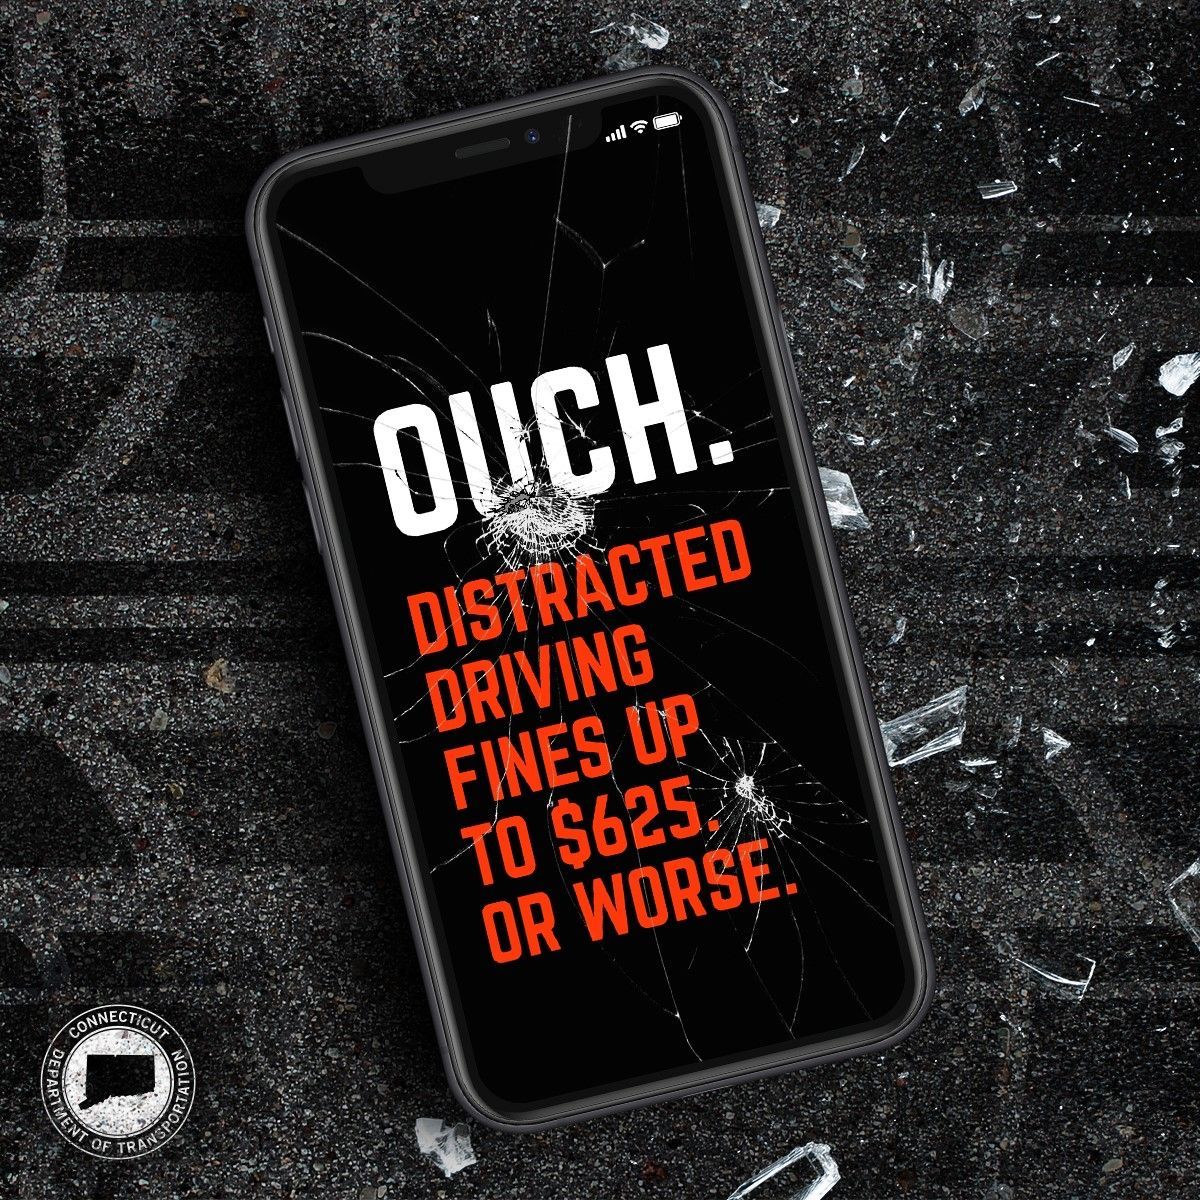 👀 Keep your eyes on the prize: arriving safely. Let's raise awareness about the dangers of distracted driving this April and carry that awareness with us throughout the year. #StayFocused #DistractedDrivingAwareness #FPDCT